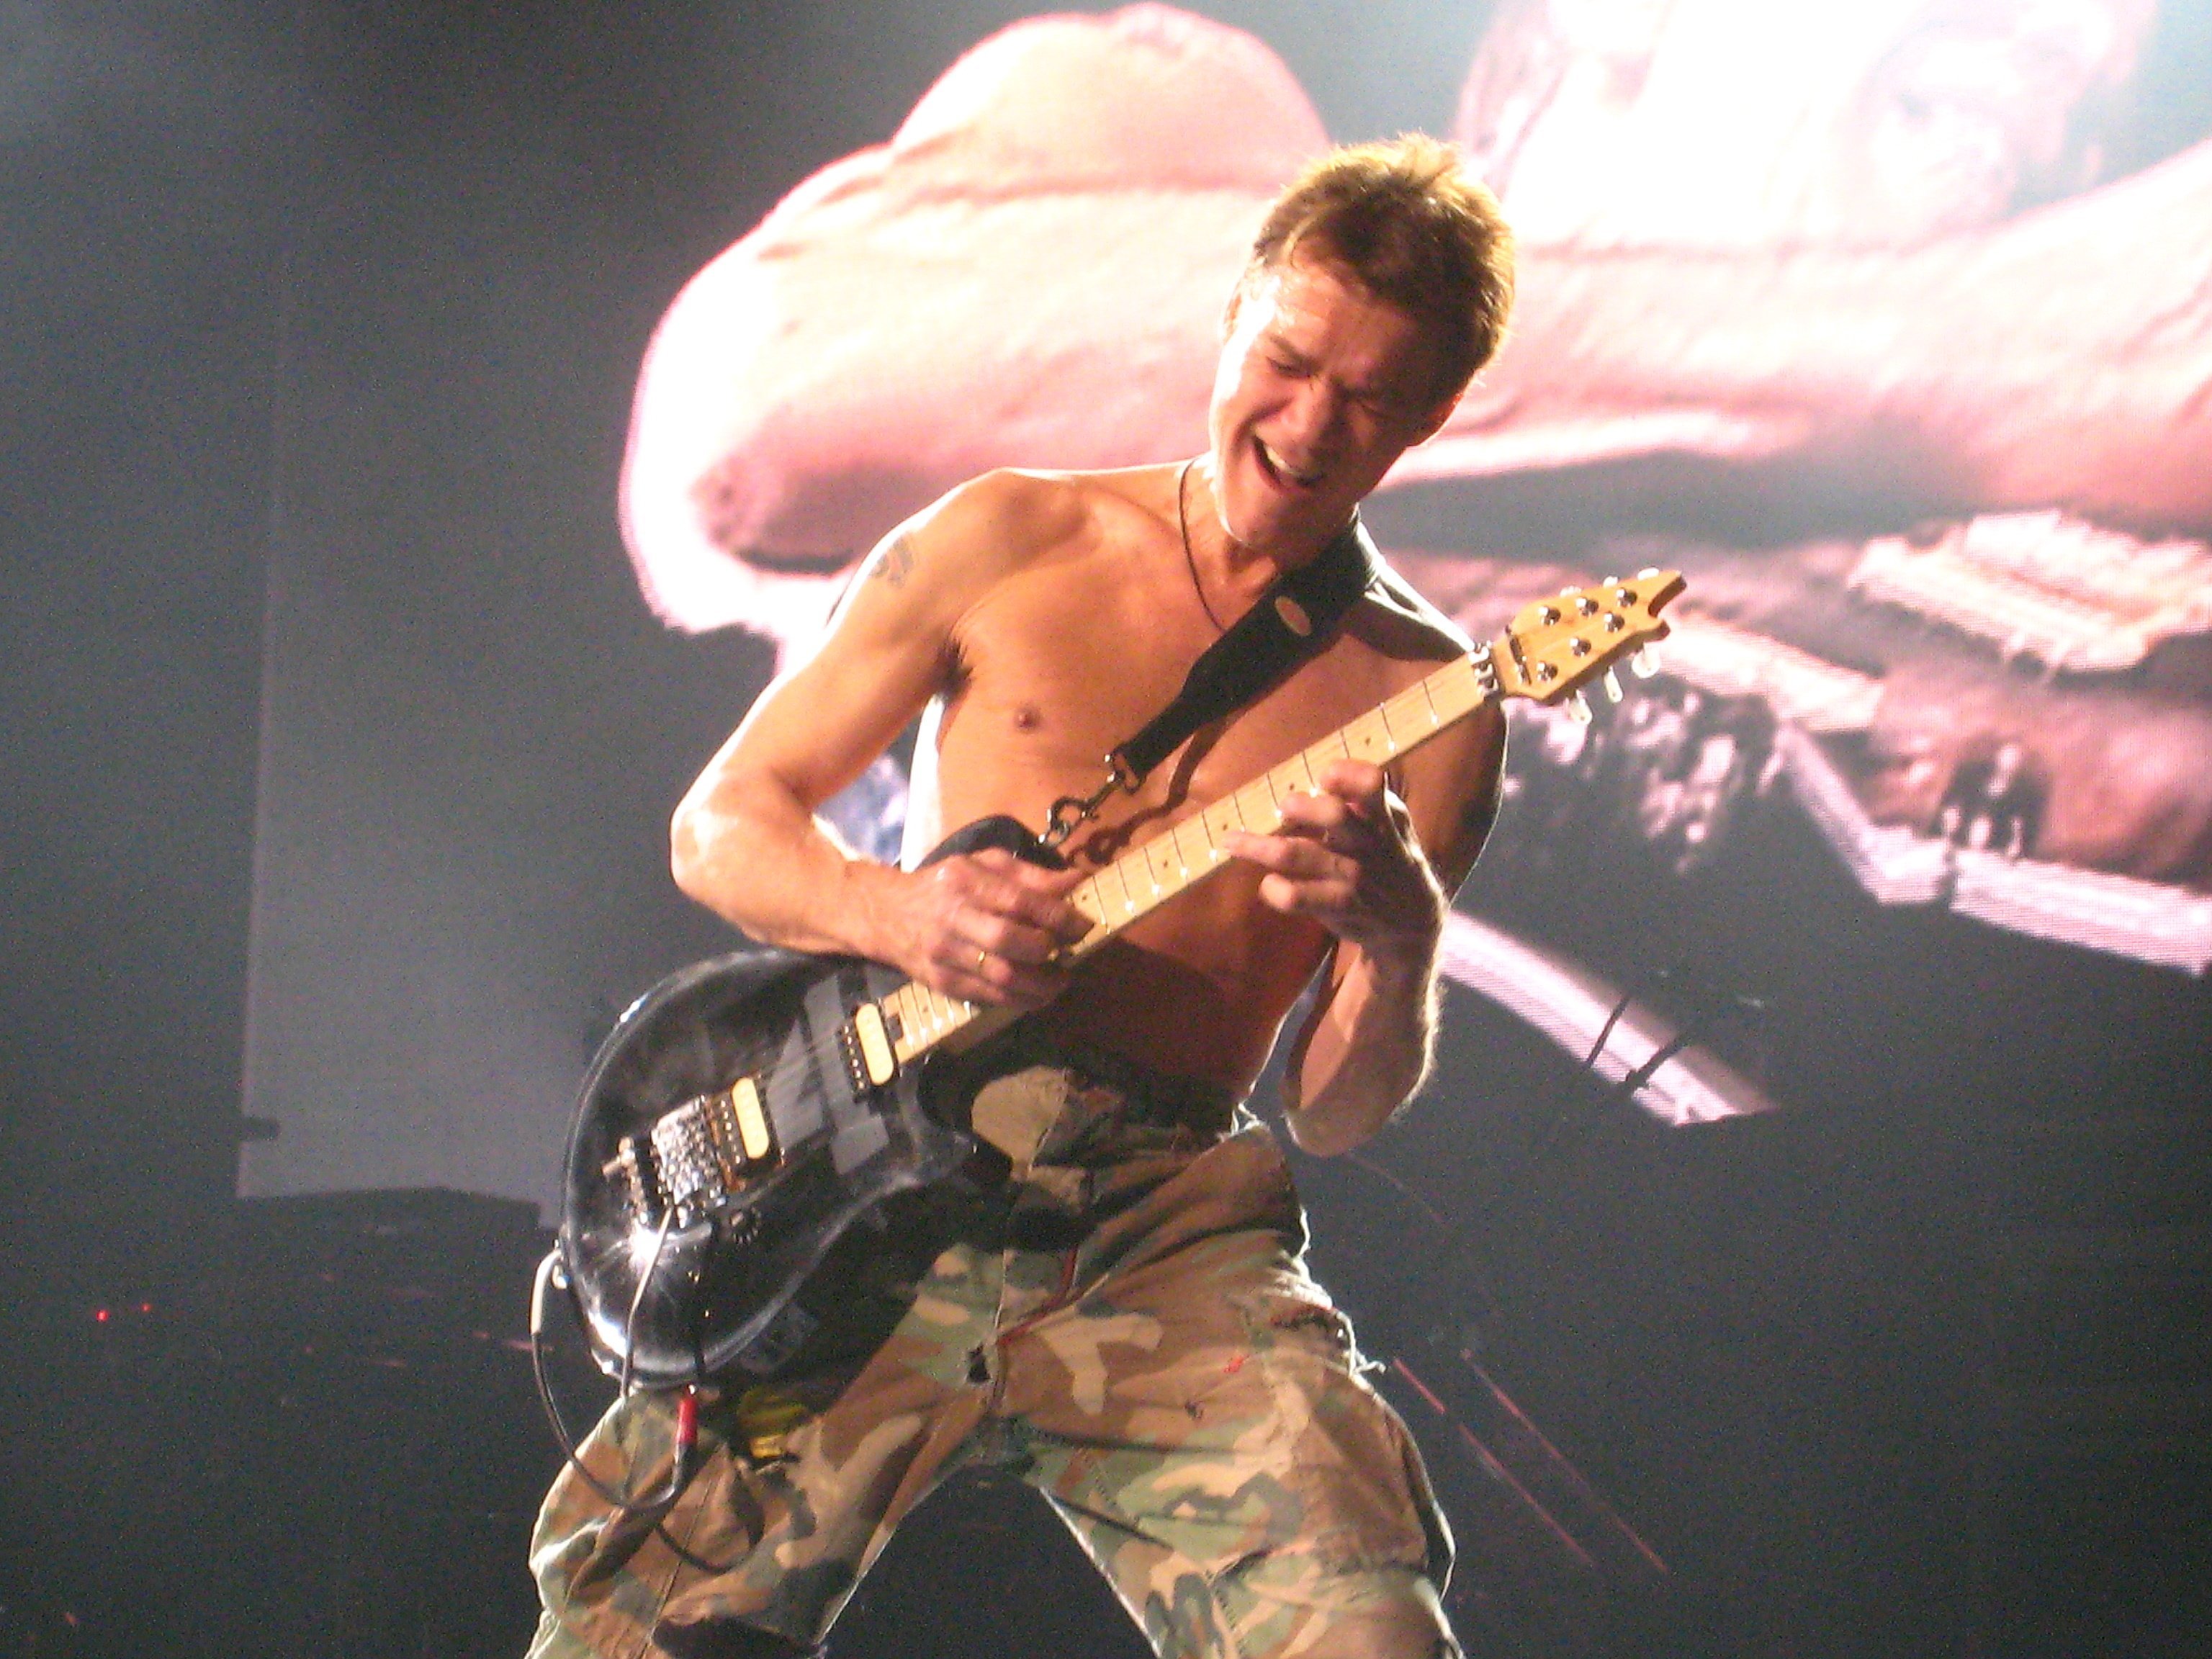 Eddie Van Halen during the 2007 "Eruption" tour in Bell Center, Montreal on November 10, 2007. | Source: Wikimedia Commons